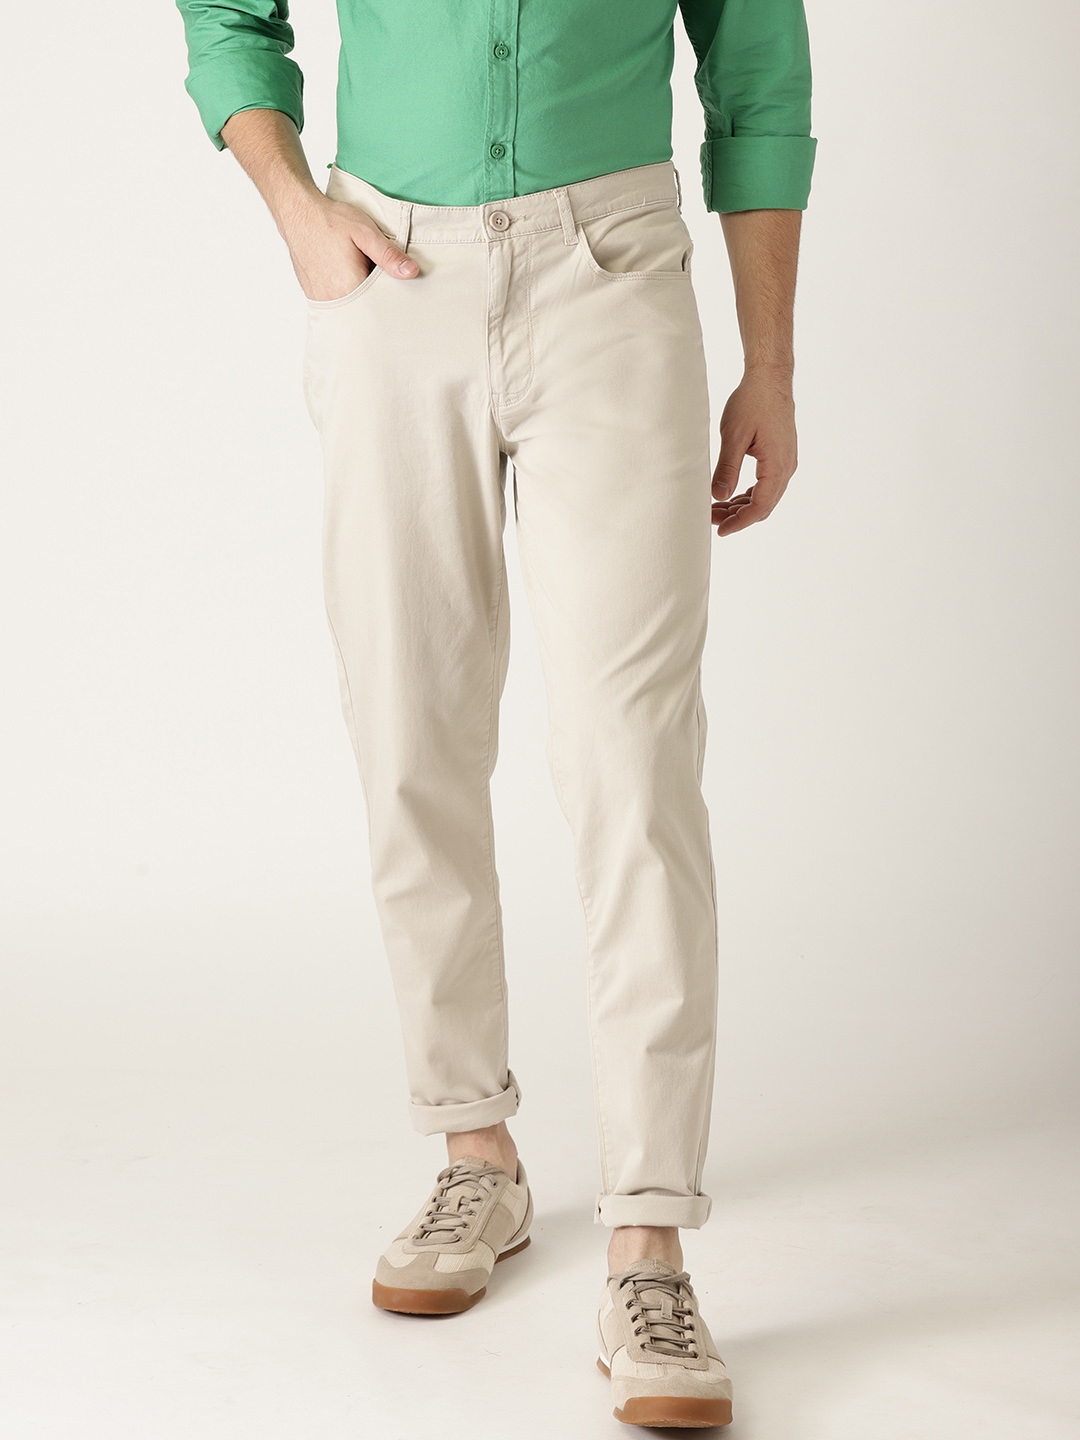 Buy United Colors Of Benetton Men Grey Slim Fit Solid Regular Trousers   Trousers for Men 7714561  Myntra